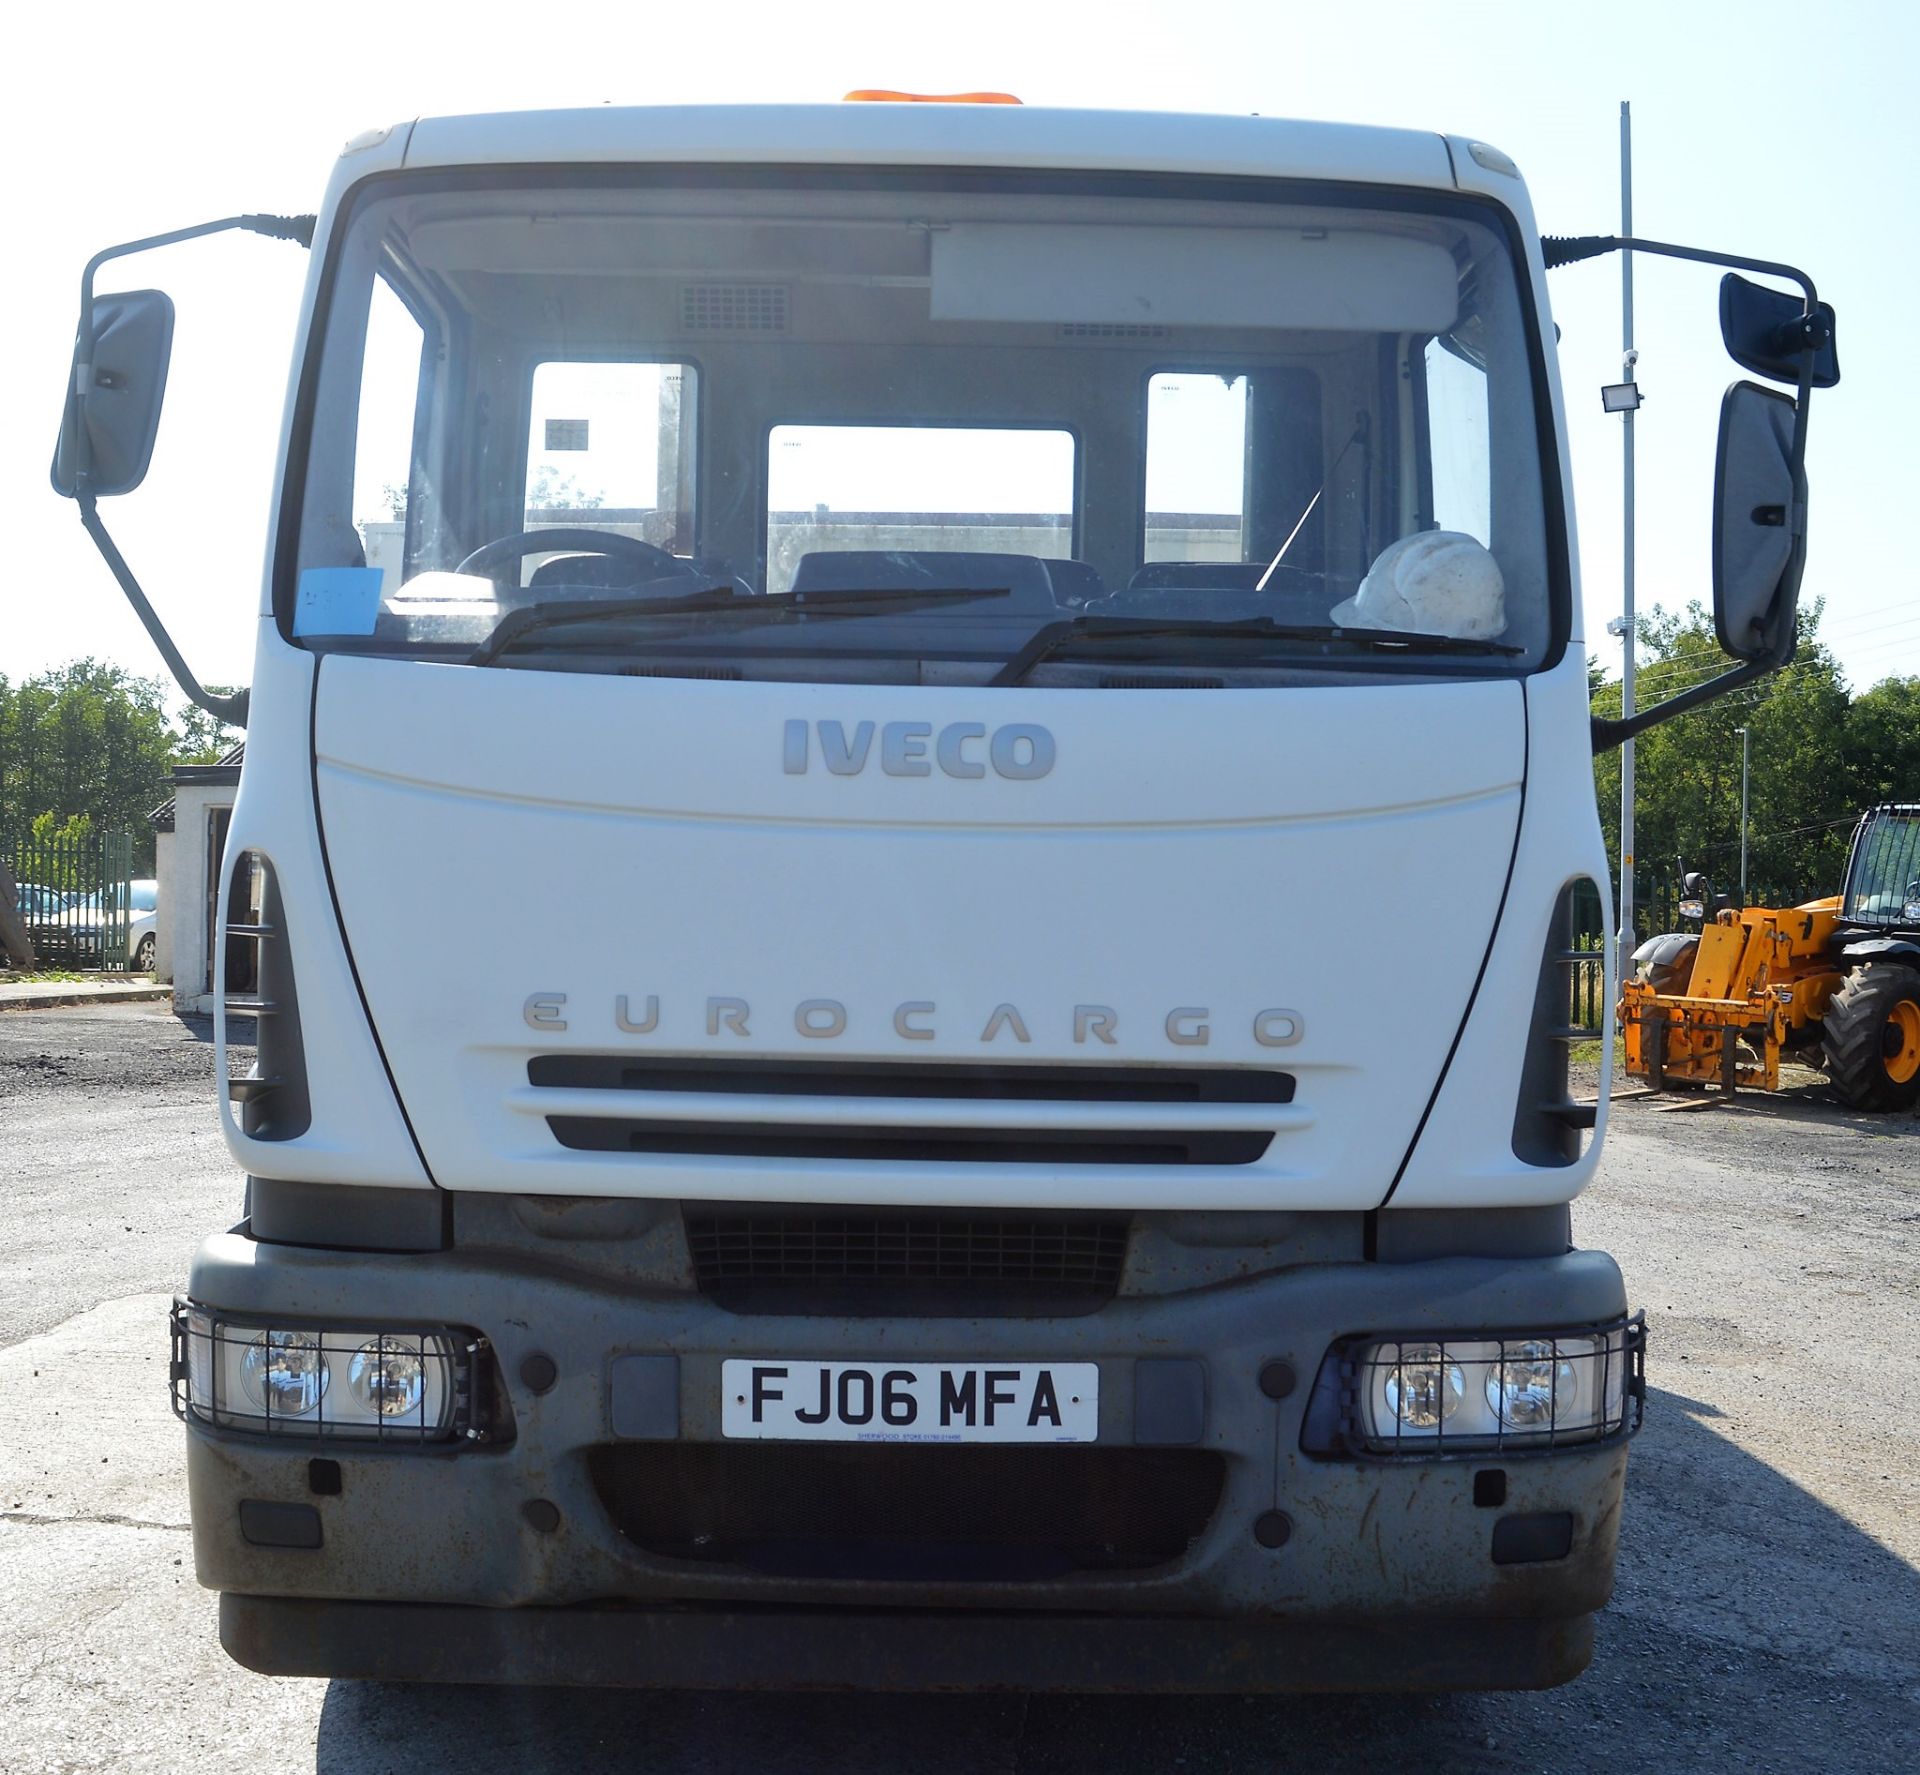 Iveco Eurocargo 180 E24 18 tonne 14 ft tipper lorry Registration Number: FJ06 MFA Date of - Image 5 of 12